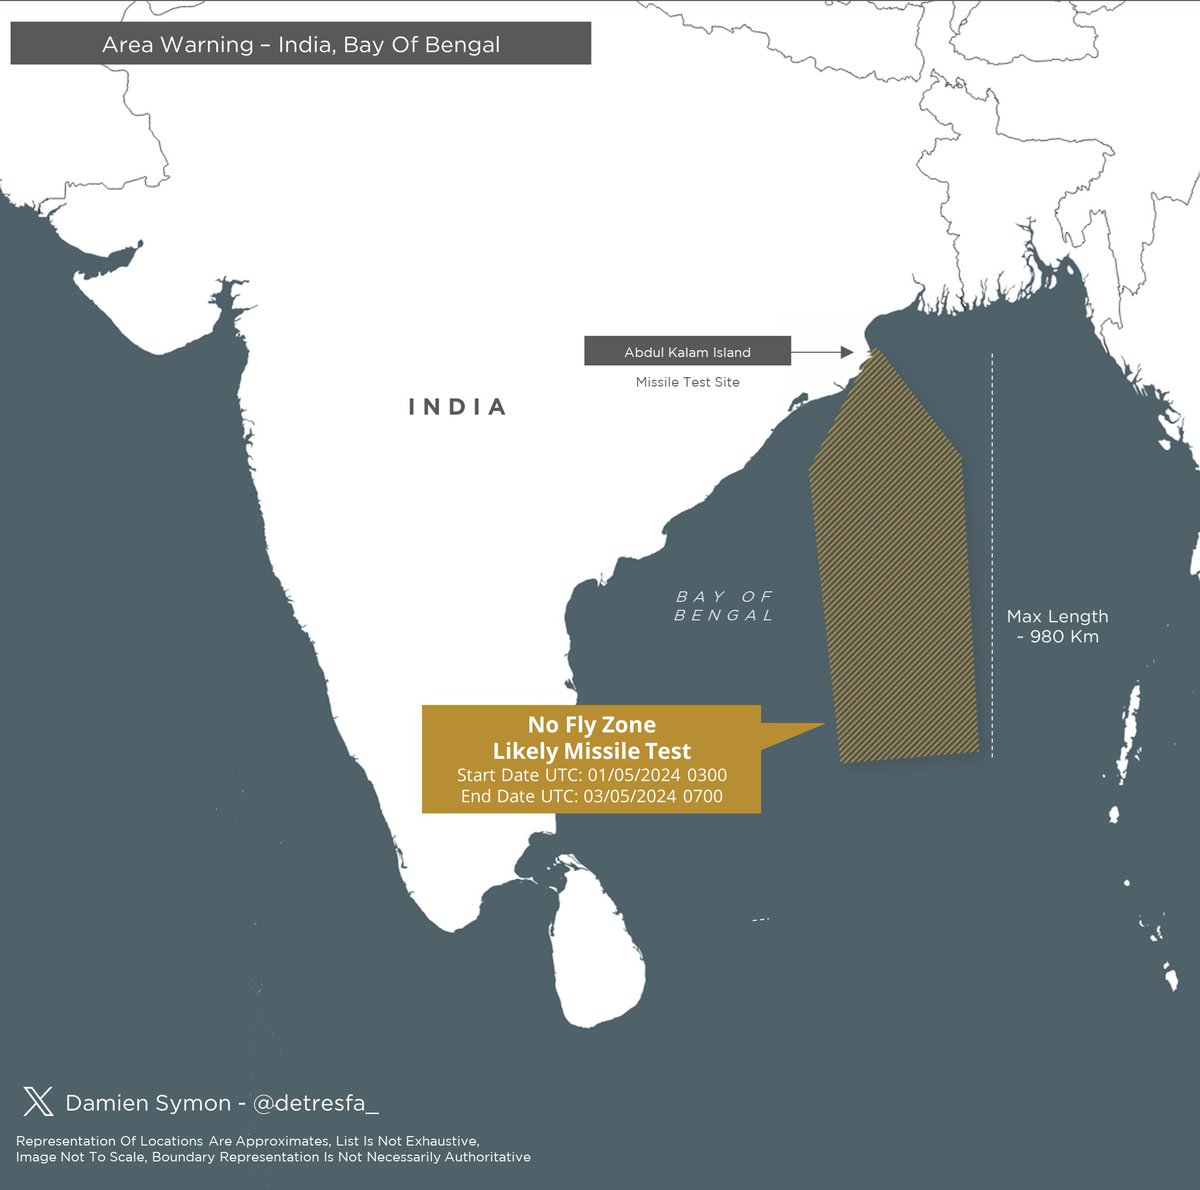 🚨 #AreaWarning 🚨 India announces a no-fly zone over the Bay of Bengal  Region from 01-03 May 2024, signaling a potential missile test. Stay  informed and stay safe! 🚀 #India #BayOfBengal #MissileTest